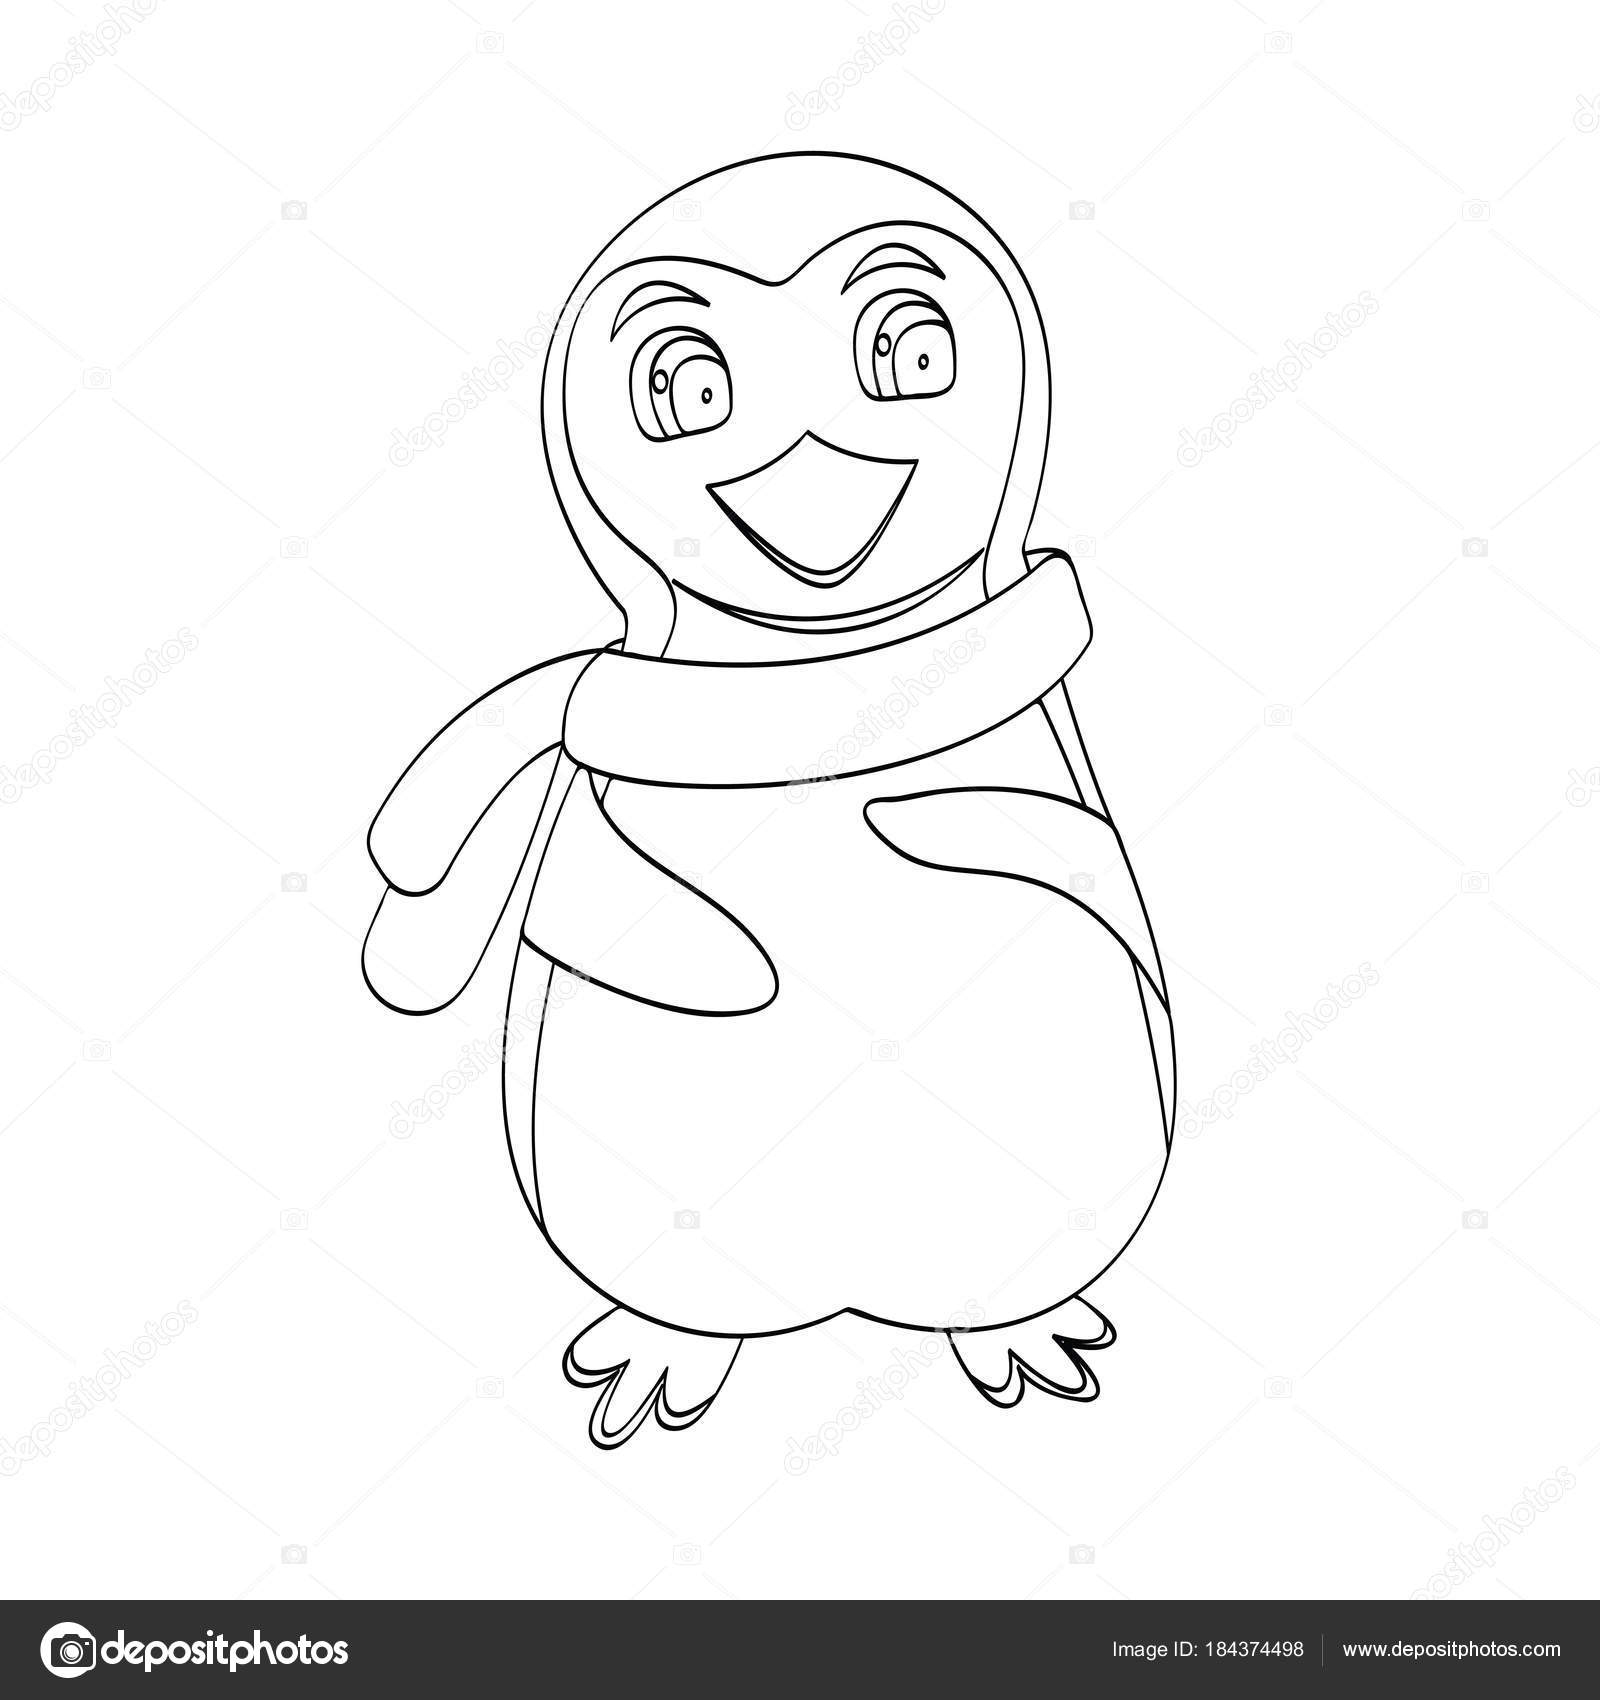 Penguin Outline Drawing at GetDrawings | Free download